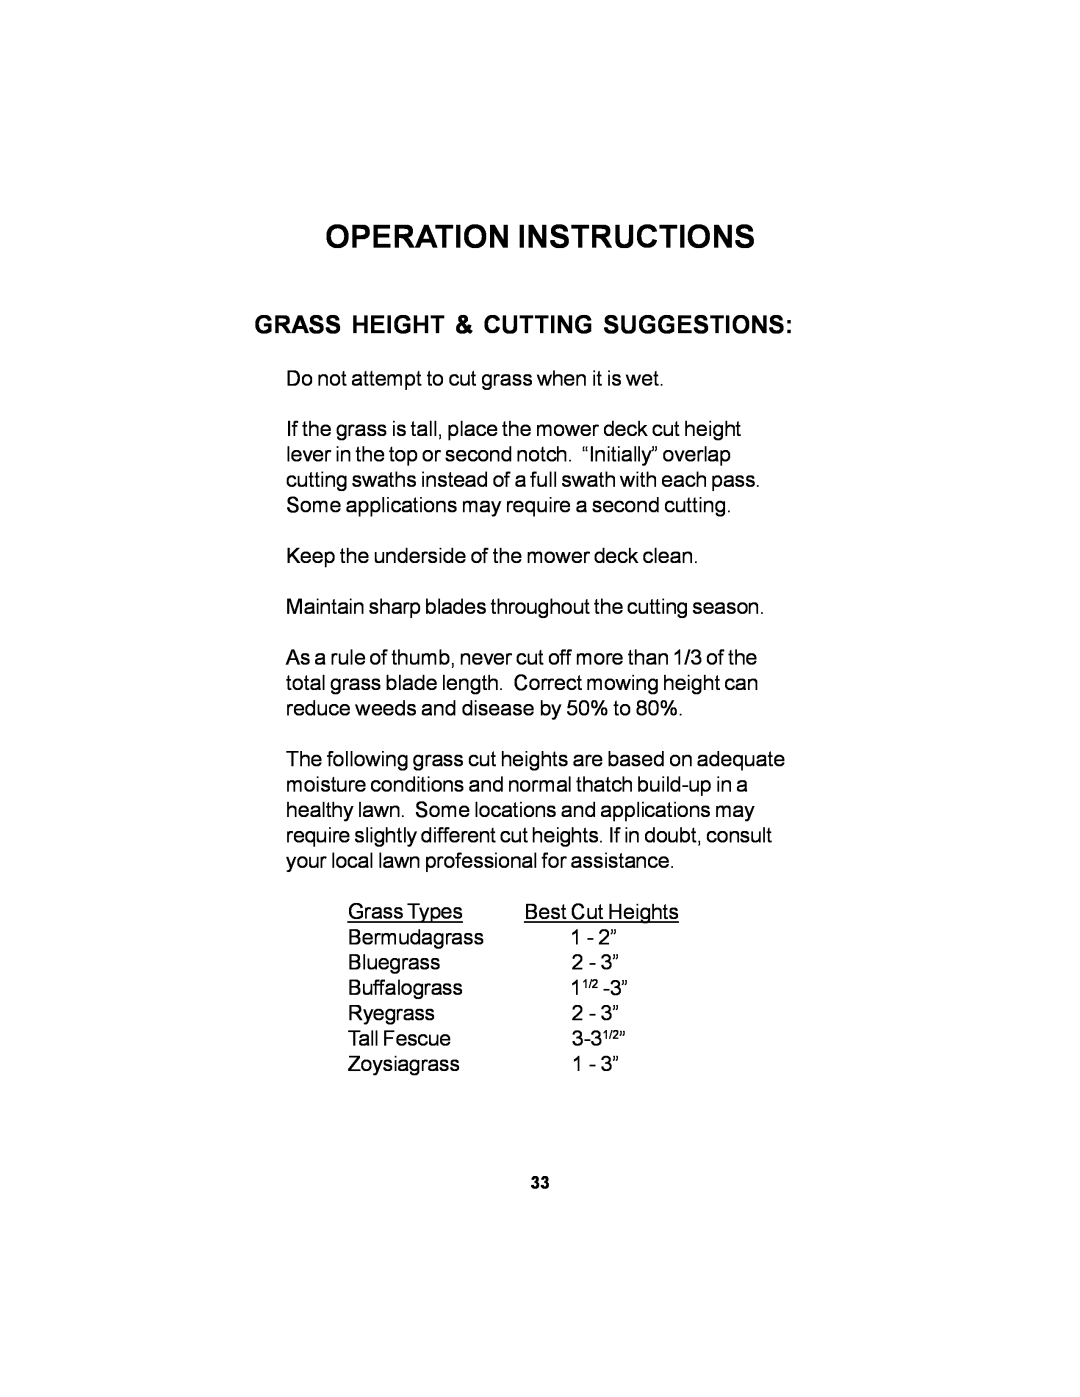 Dixon 36 manual Grass Height & Cutting Suggestions, Operation Instructions 